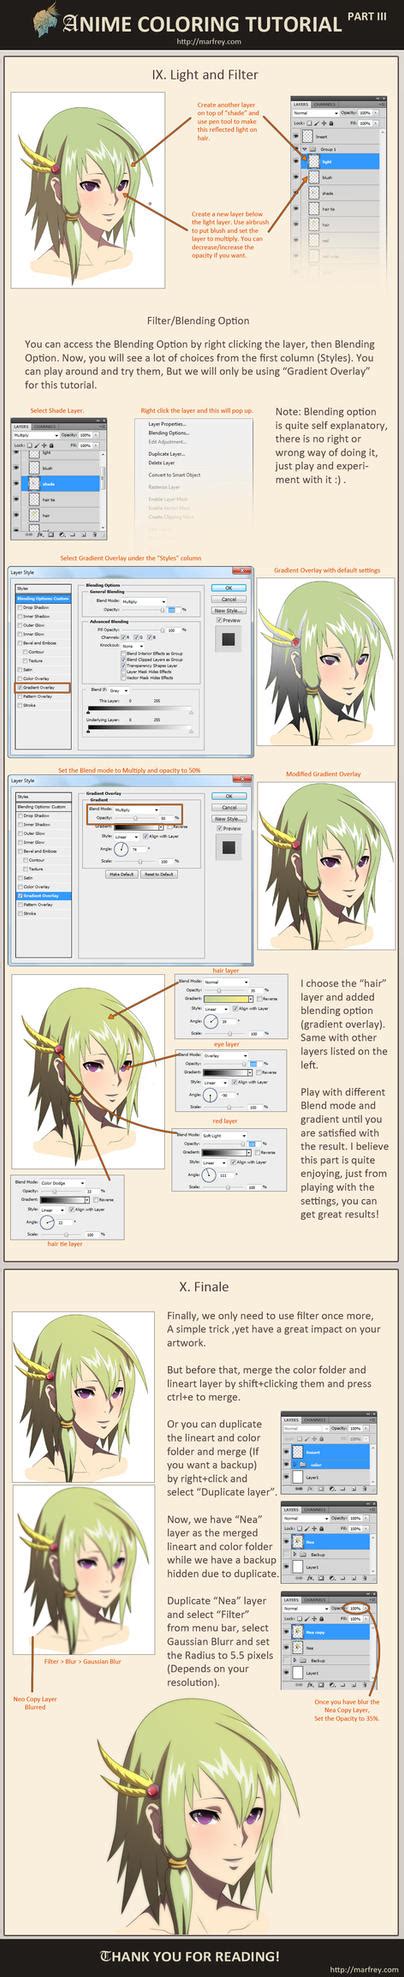 Anime Coloring Tutorial Part 3 By Marfrey On Deviantart